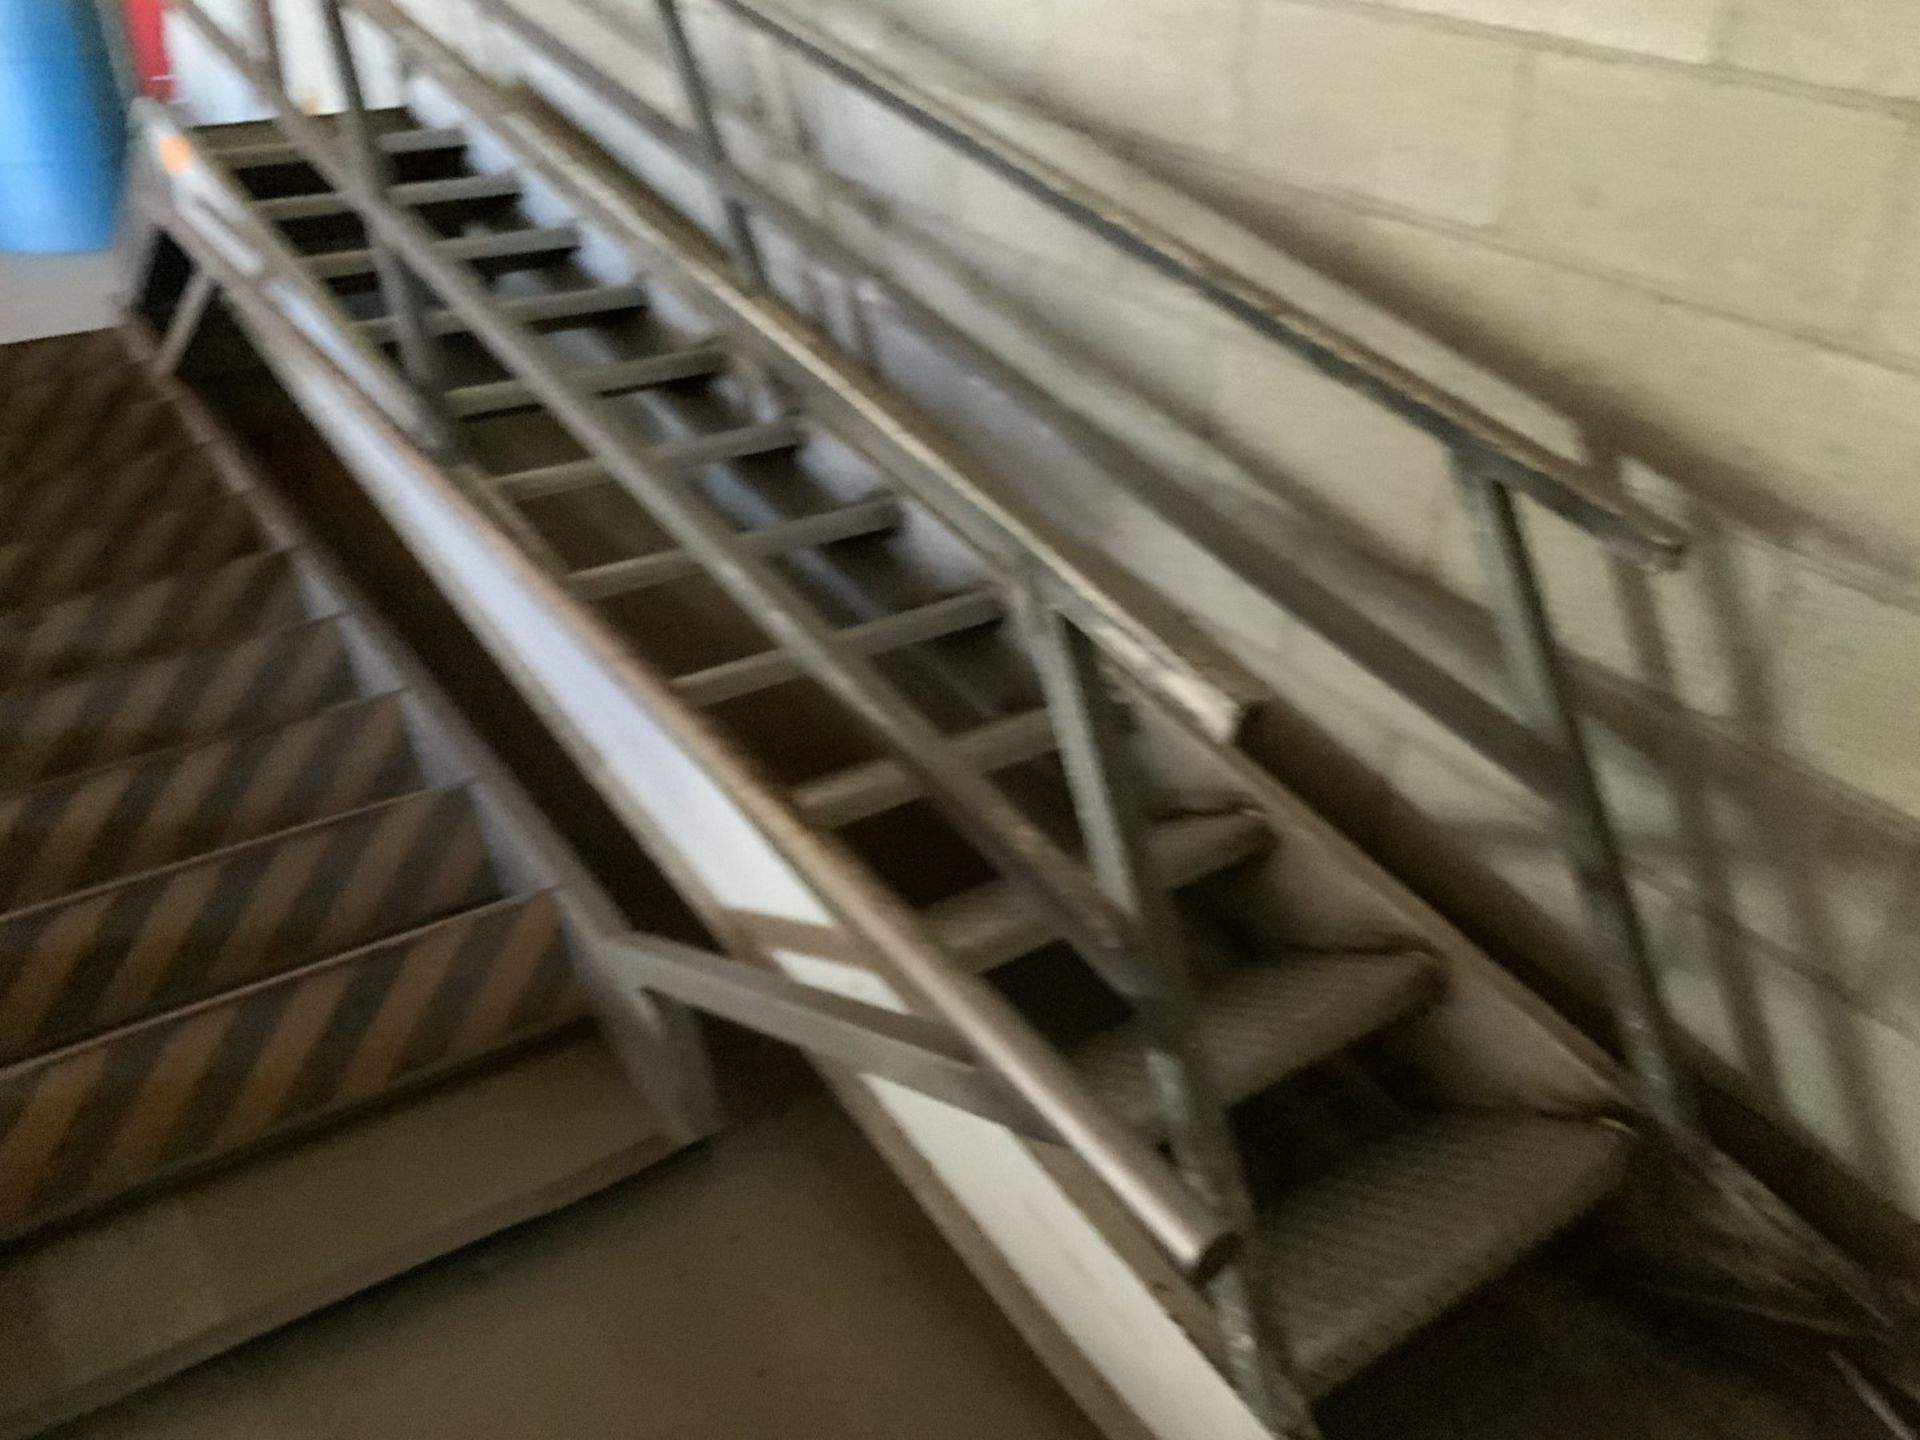 Stainless Stairs - Image 2 of 4